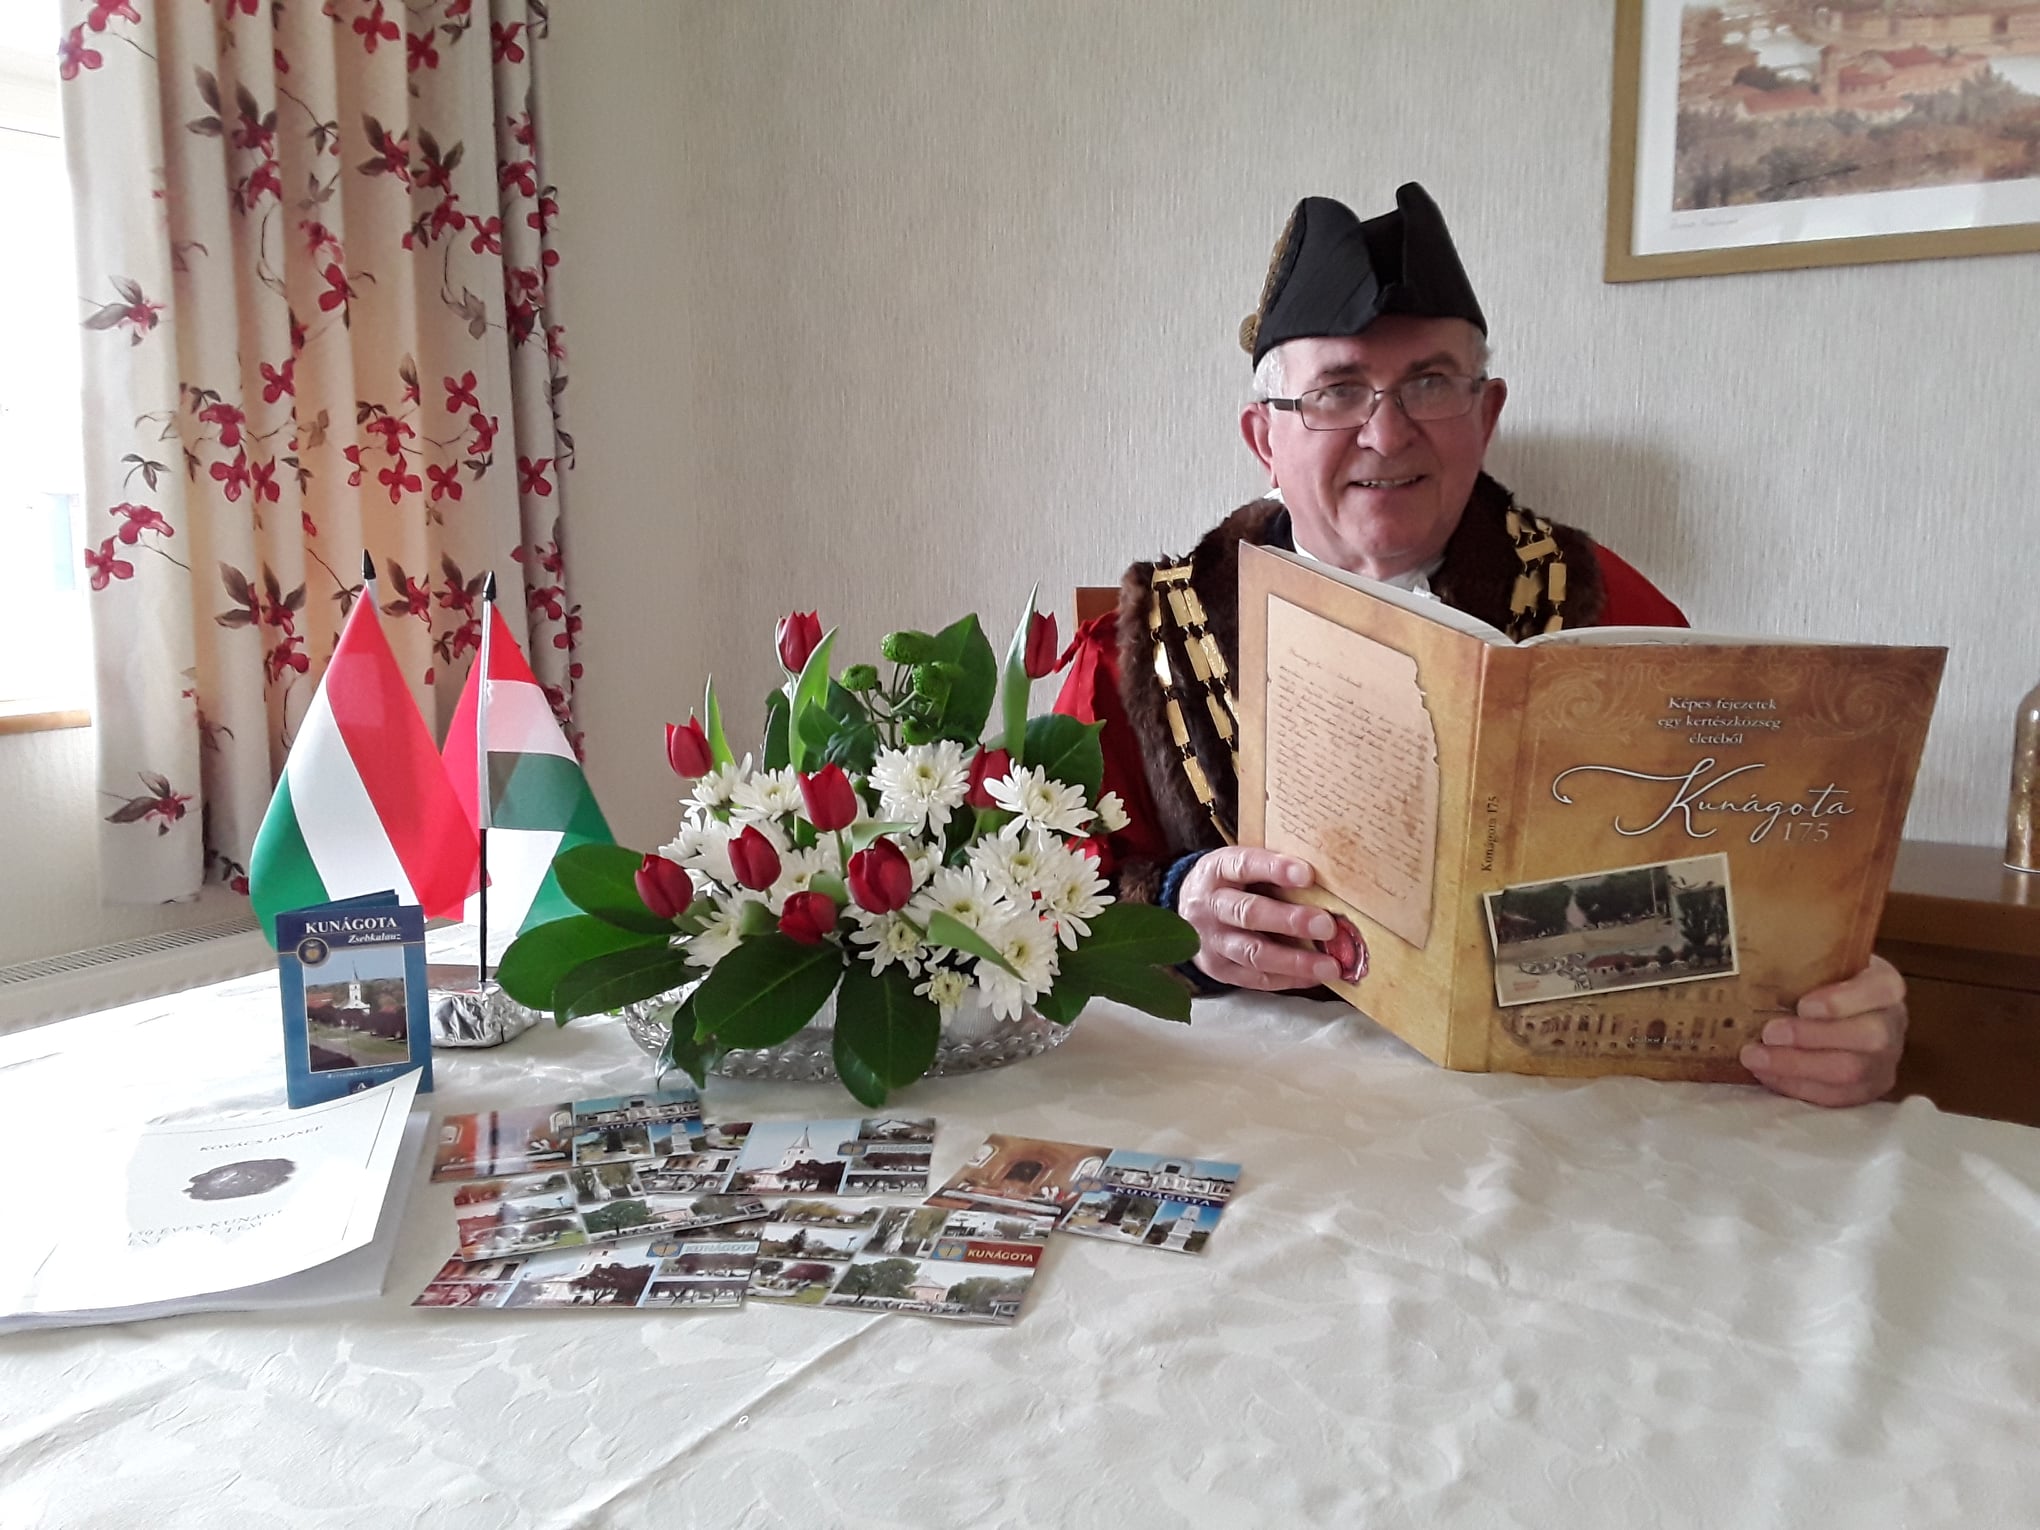 This is how a small Welsh town celebrated its Hungarian national holiday